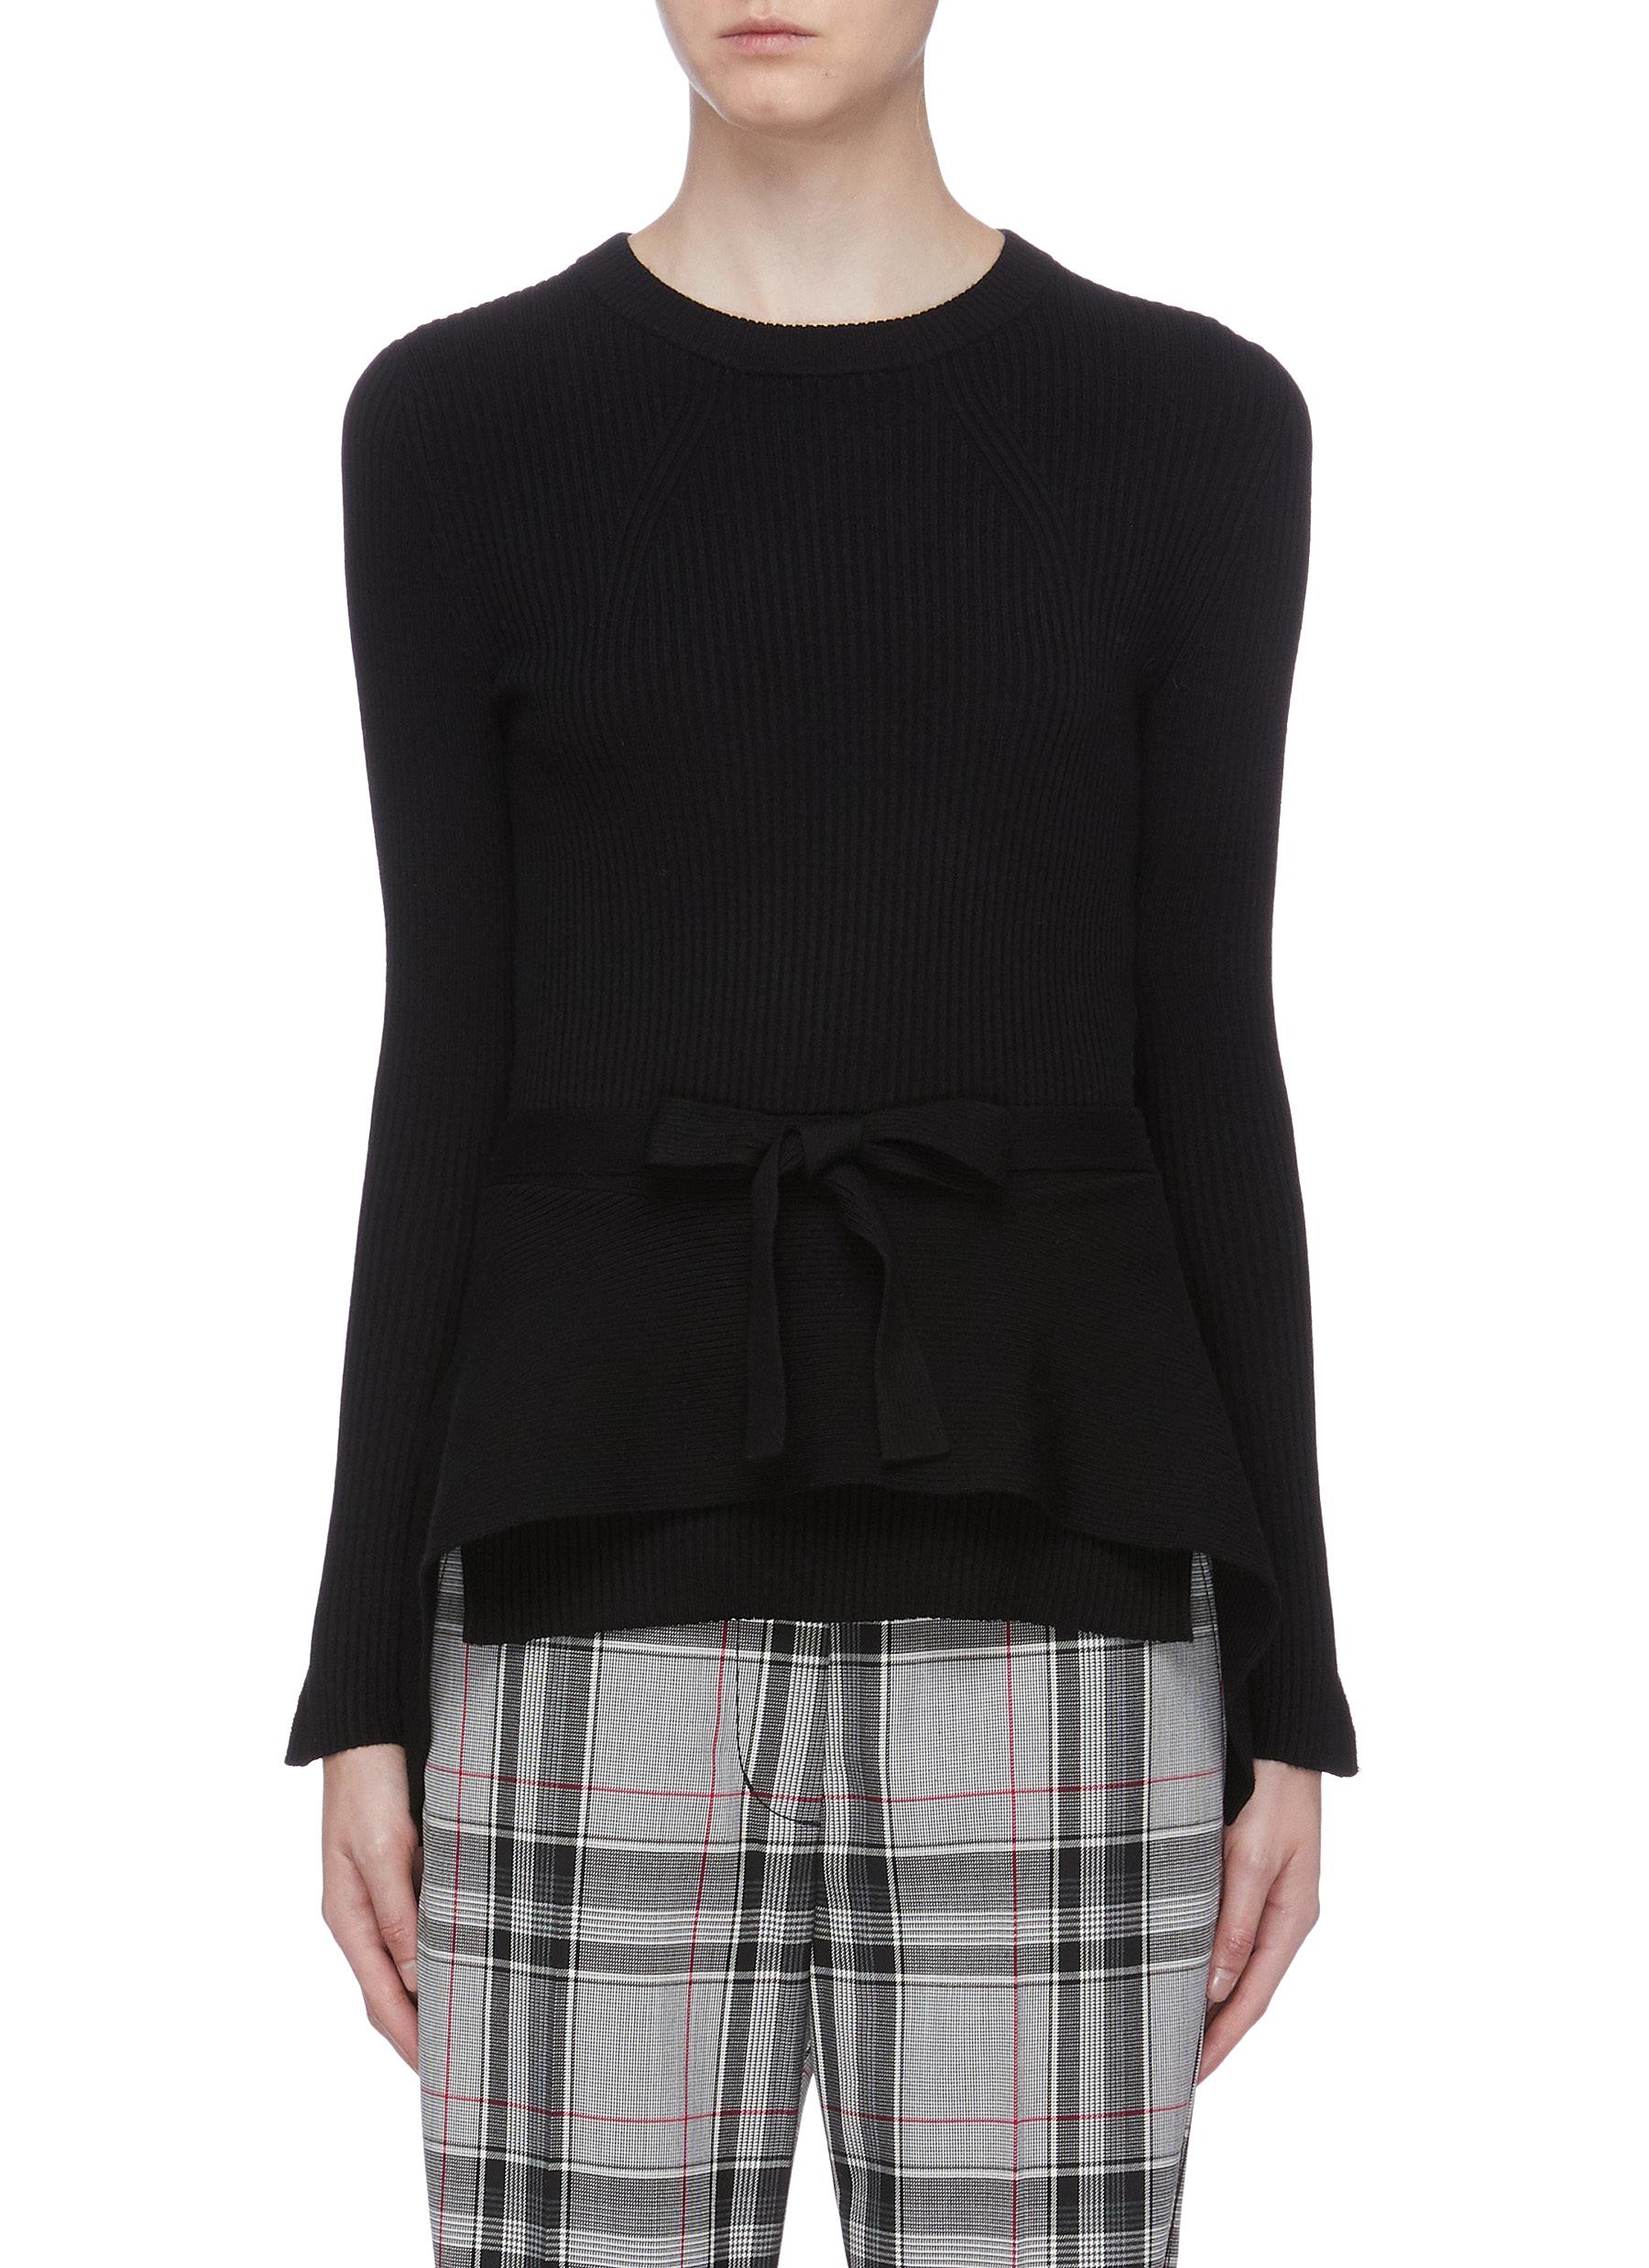 Belted layered front rib knit top by 3.1 Phillip Lim